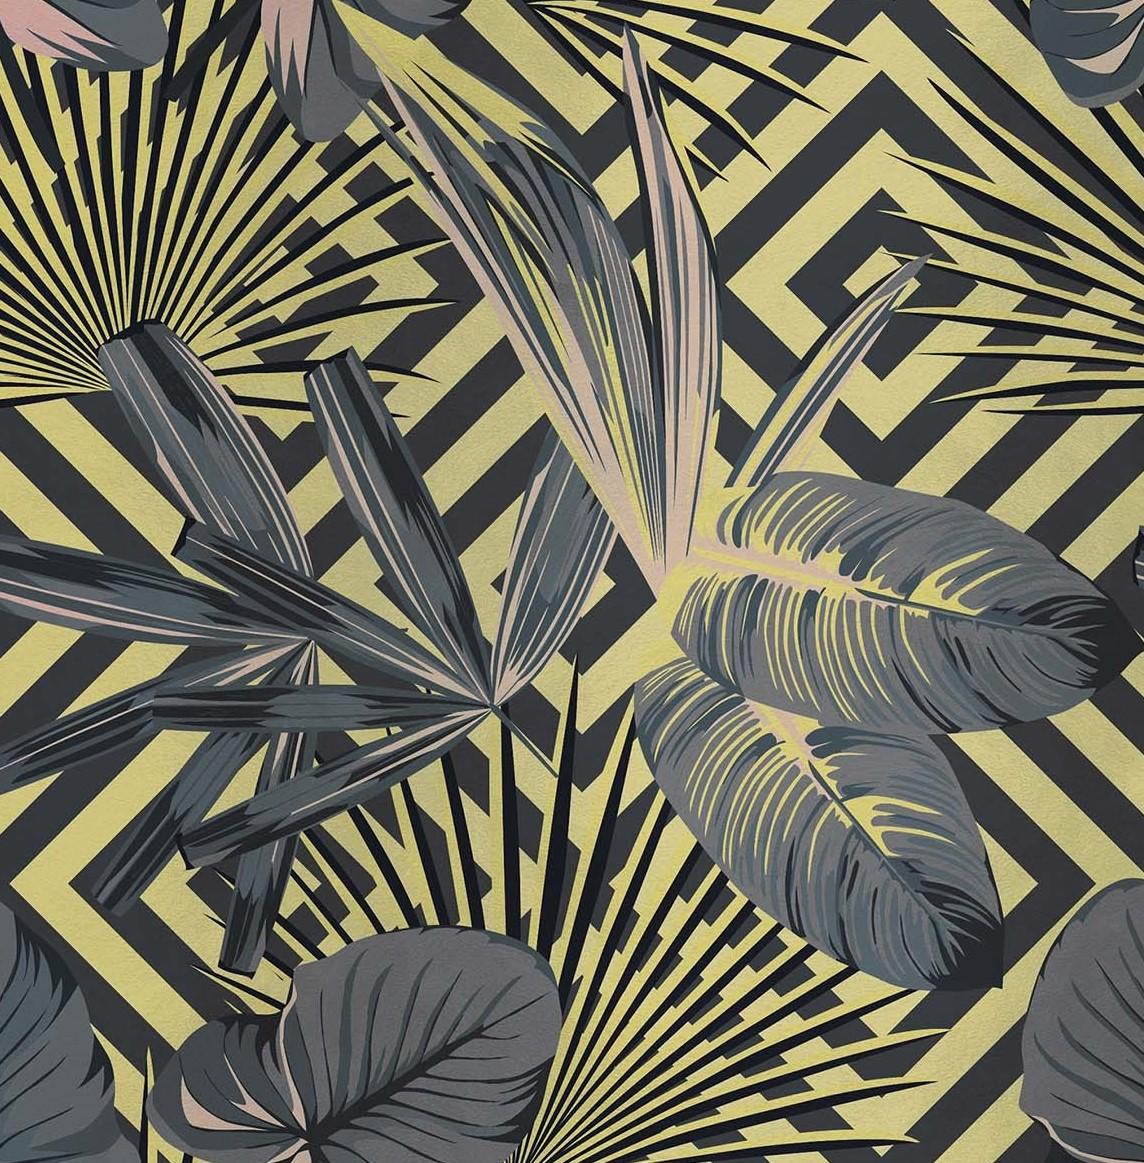 The bold design of this wall covering, where exotic leaves create a mesmerizing visual contrast over a geometric background, will make a statement in a modern or eclectic interior, either if used for an entire room or only to add texture and color